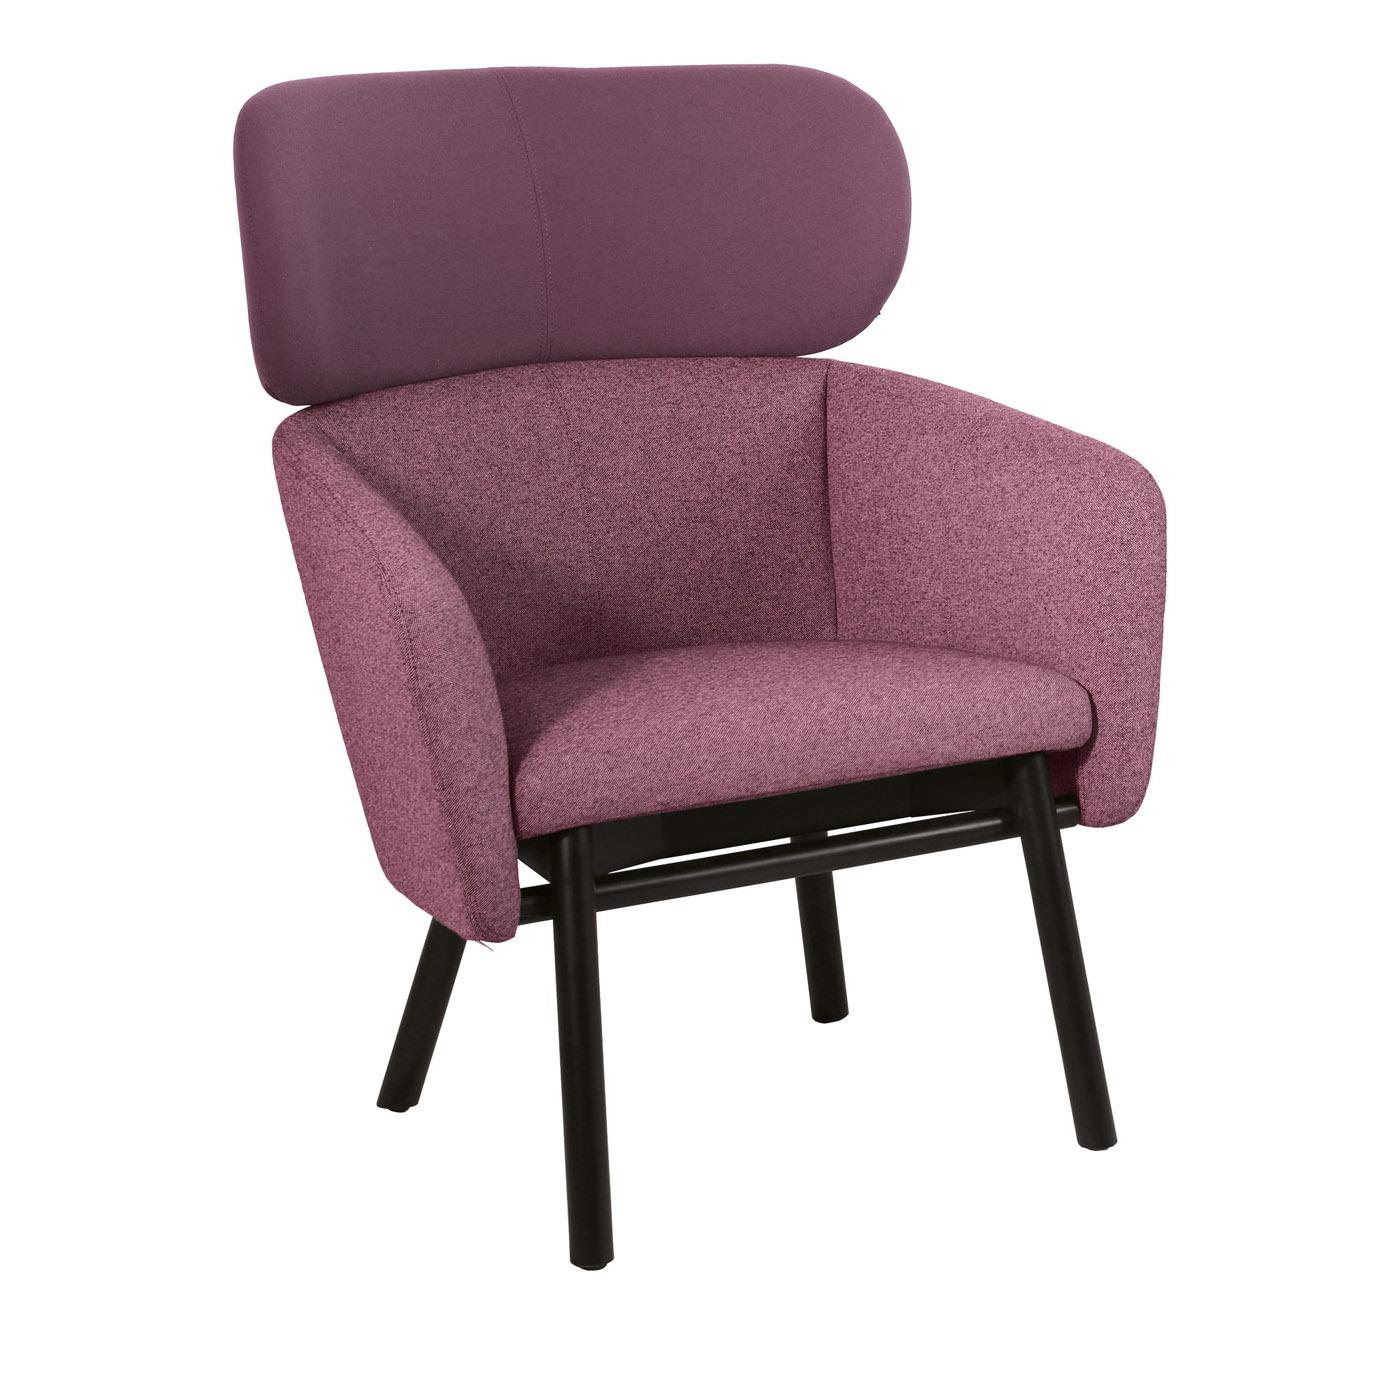 This armchair is a superb addition to both Classic and contemporary interiors, exuding sophistication and comfort. The welcoming seat is upholstered in a lilac fabric, and padded of a combination of polyurethane and dacron, like the back and